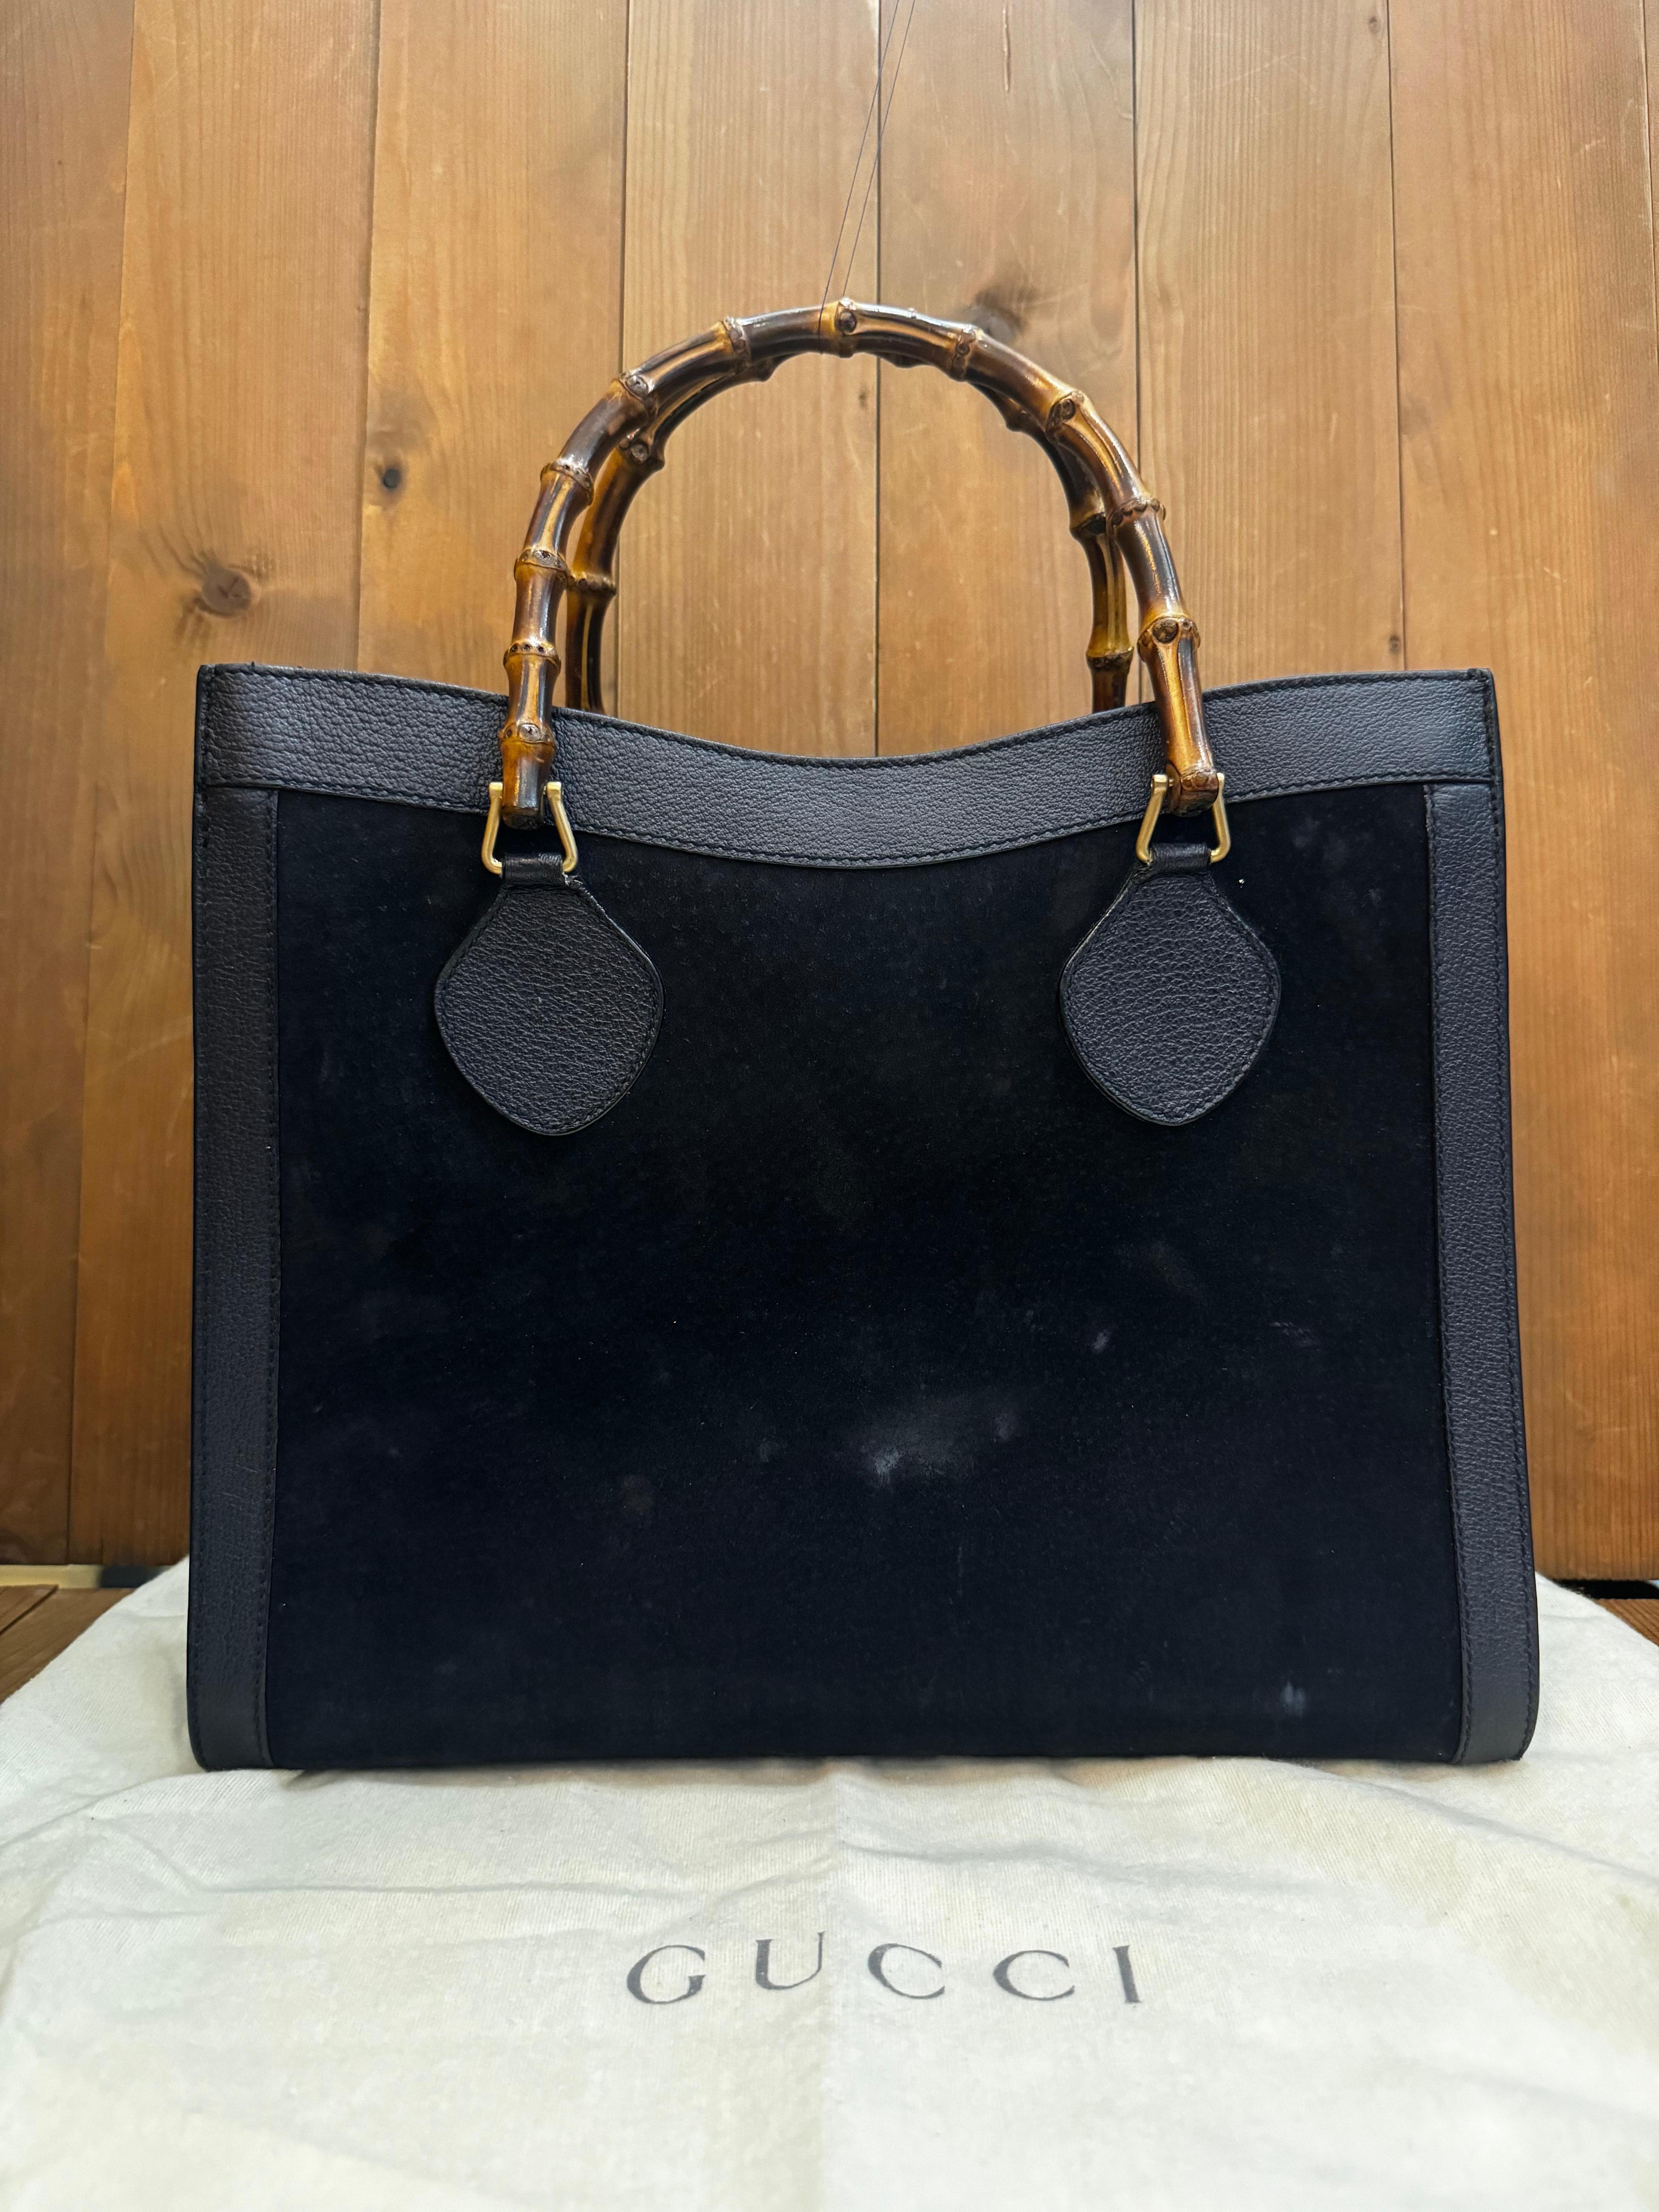 This vintage GUCCI Diana bamboo tote is crafted of pigskin leather and nubuck in navy featuring matt gold toned hardware and bamboo handles. Top magnetic snap closure opens to a new interior in black featuring two main compartments with one zippered